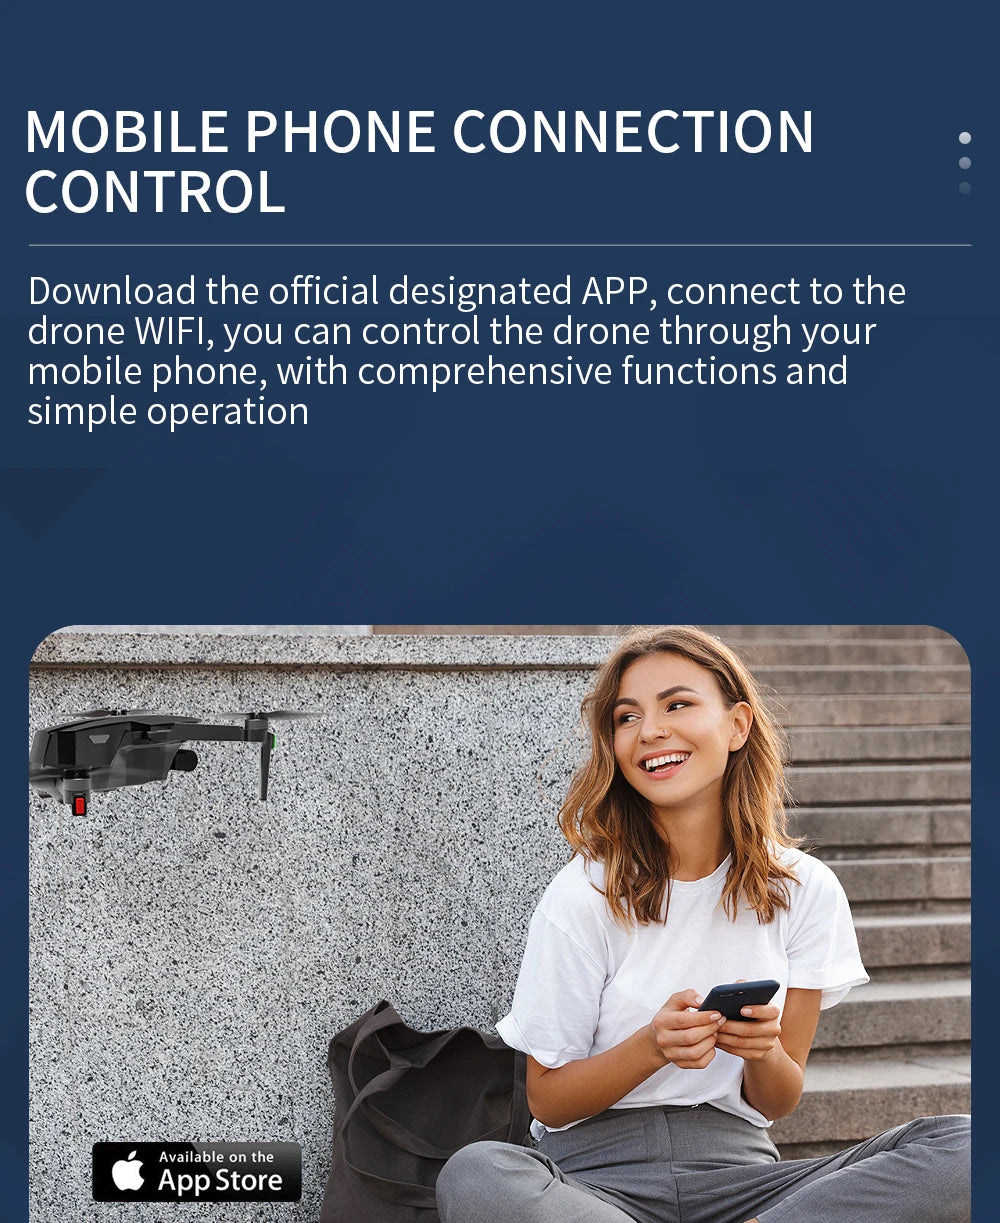 ZLL SG107 PRO Drone, download the official designated app, connect to the drone wifi, you can